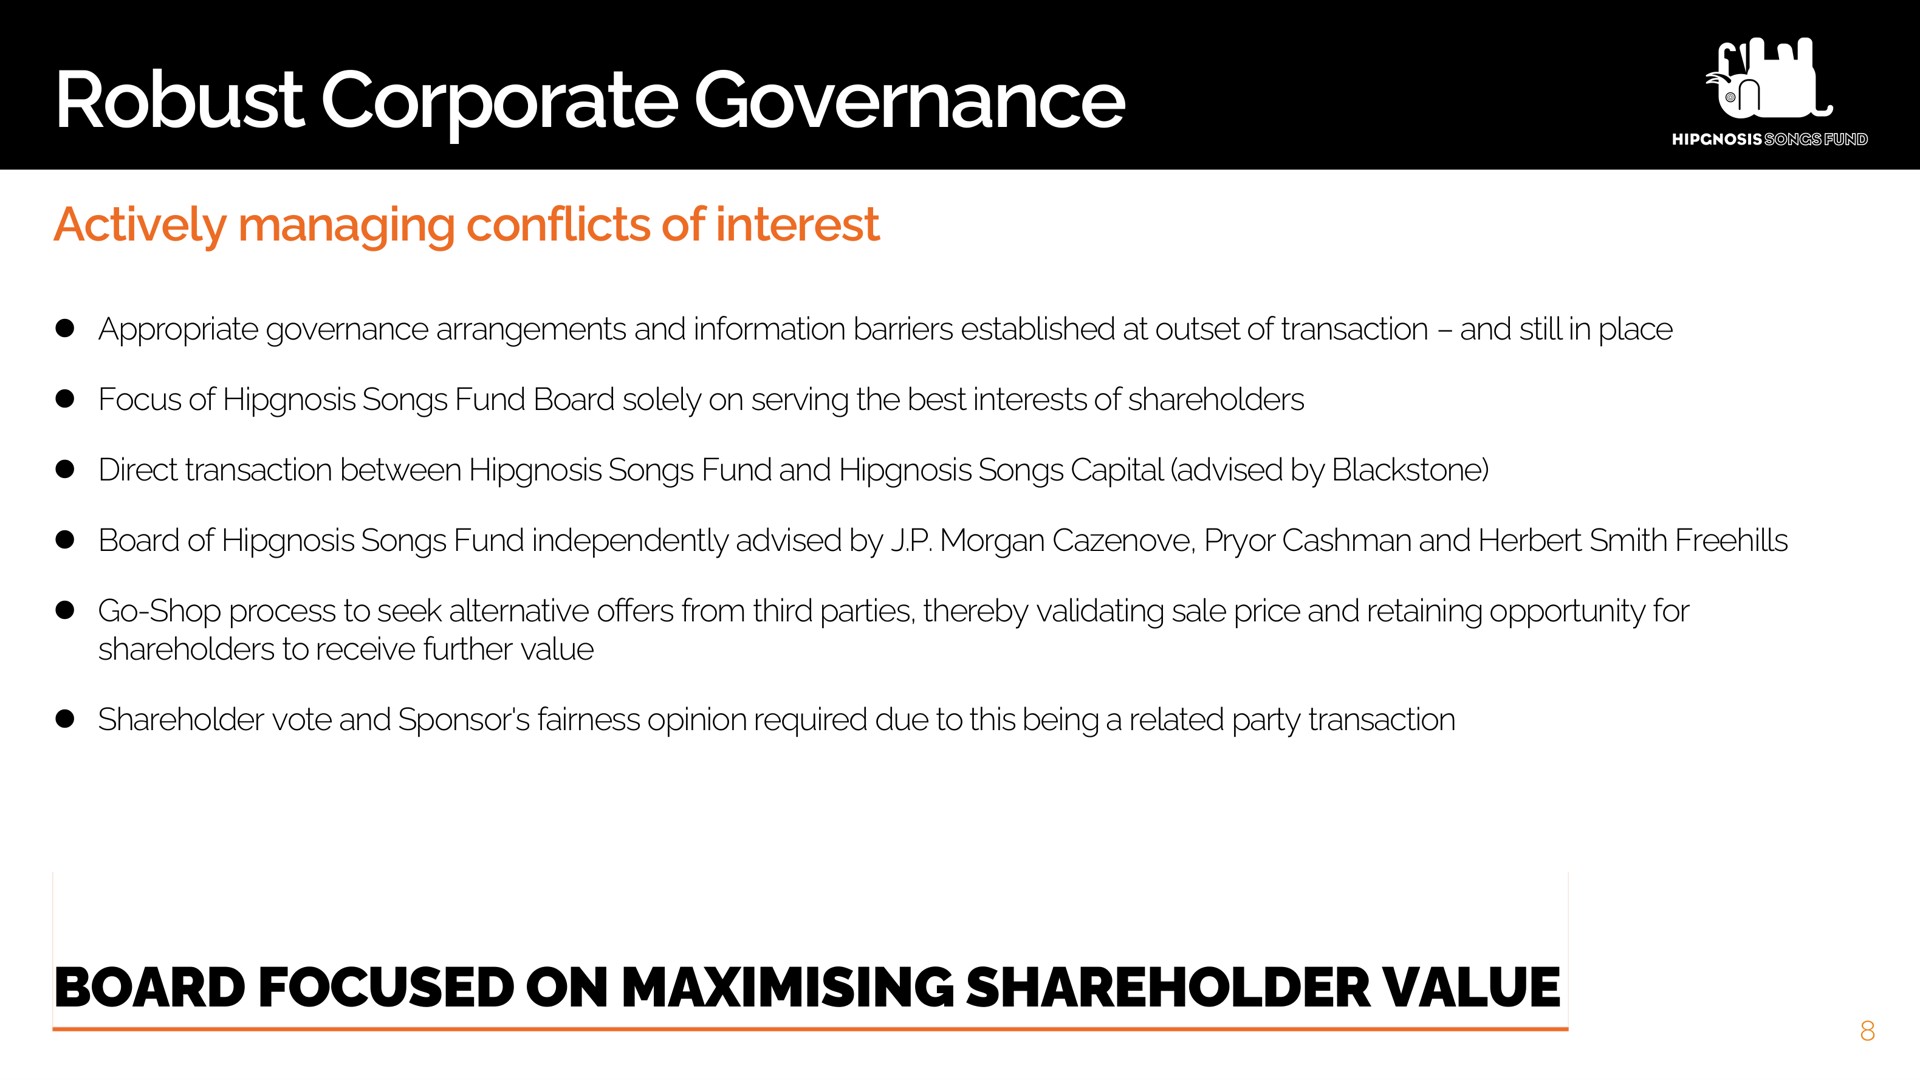 robust corporate governance board focused on shareholder value | Hipgnosis Songs Fund